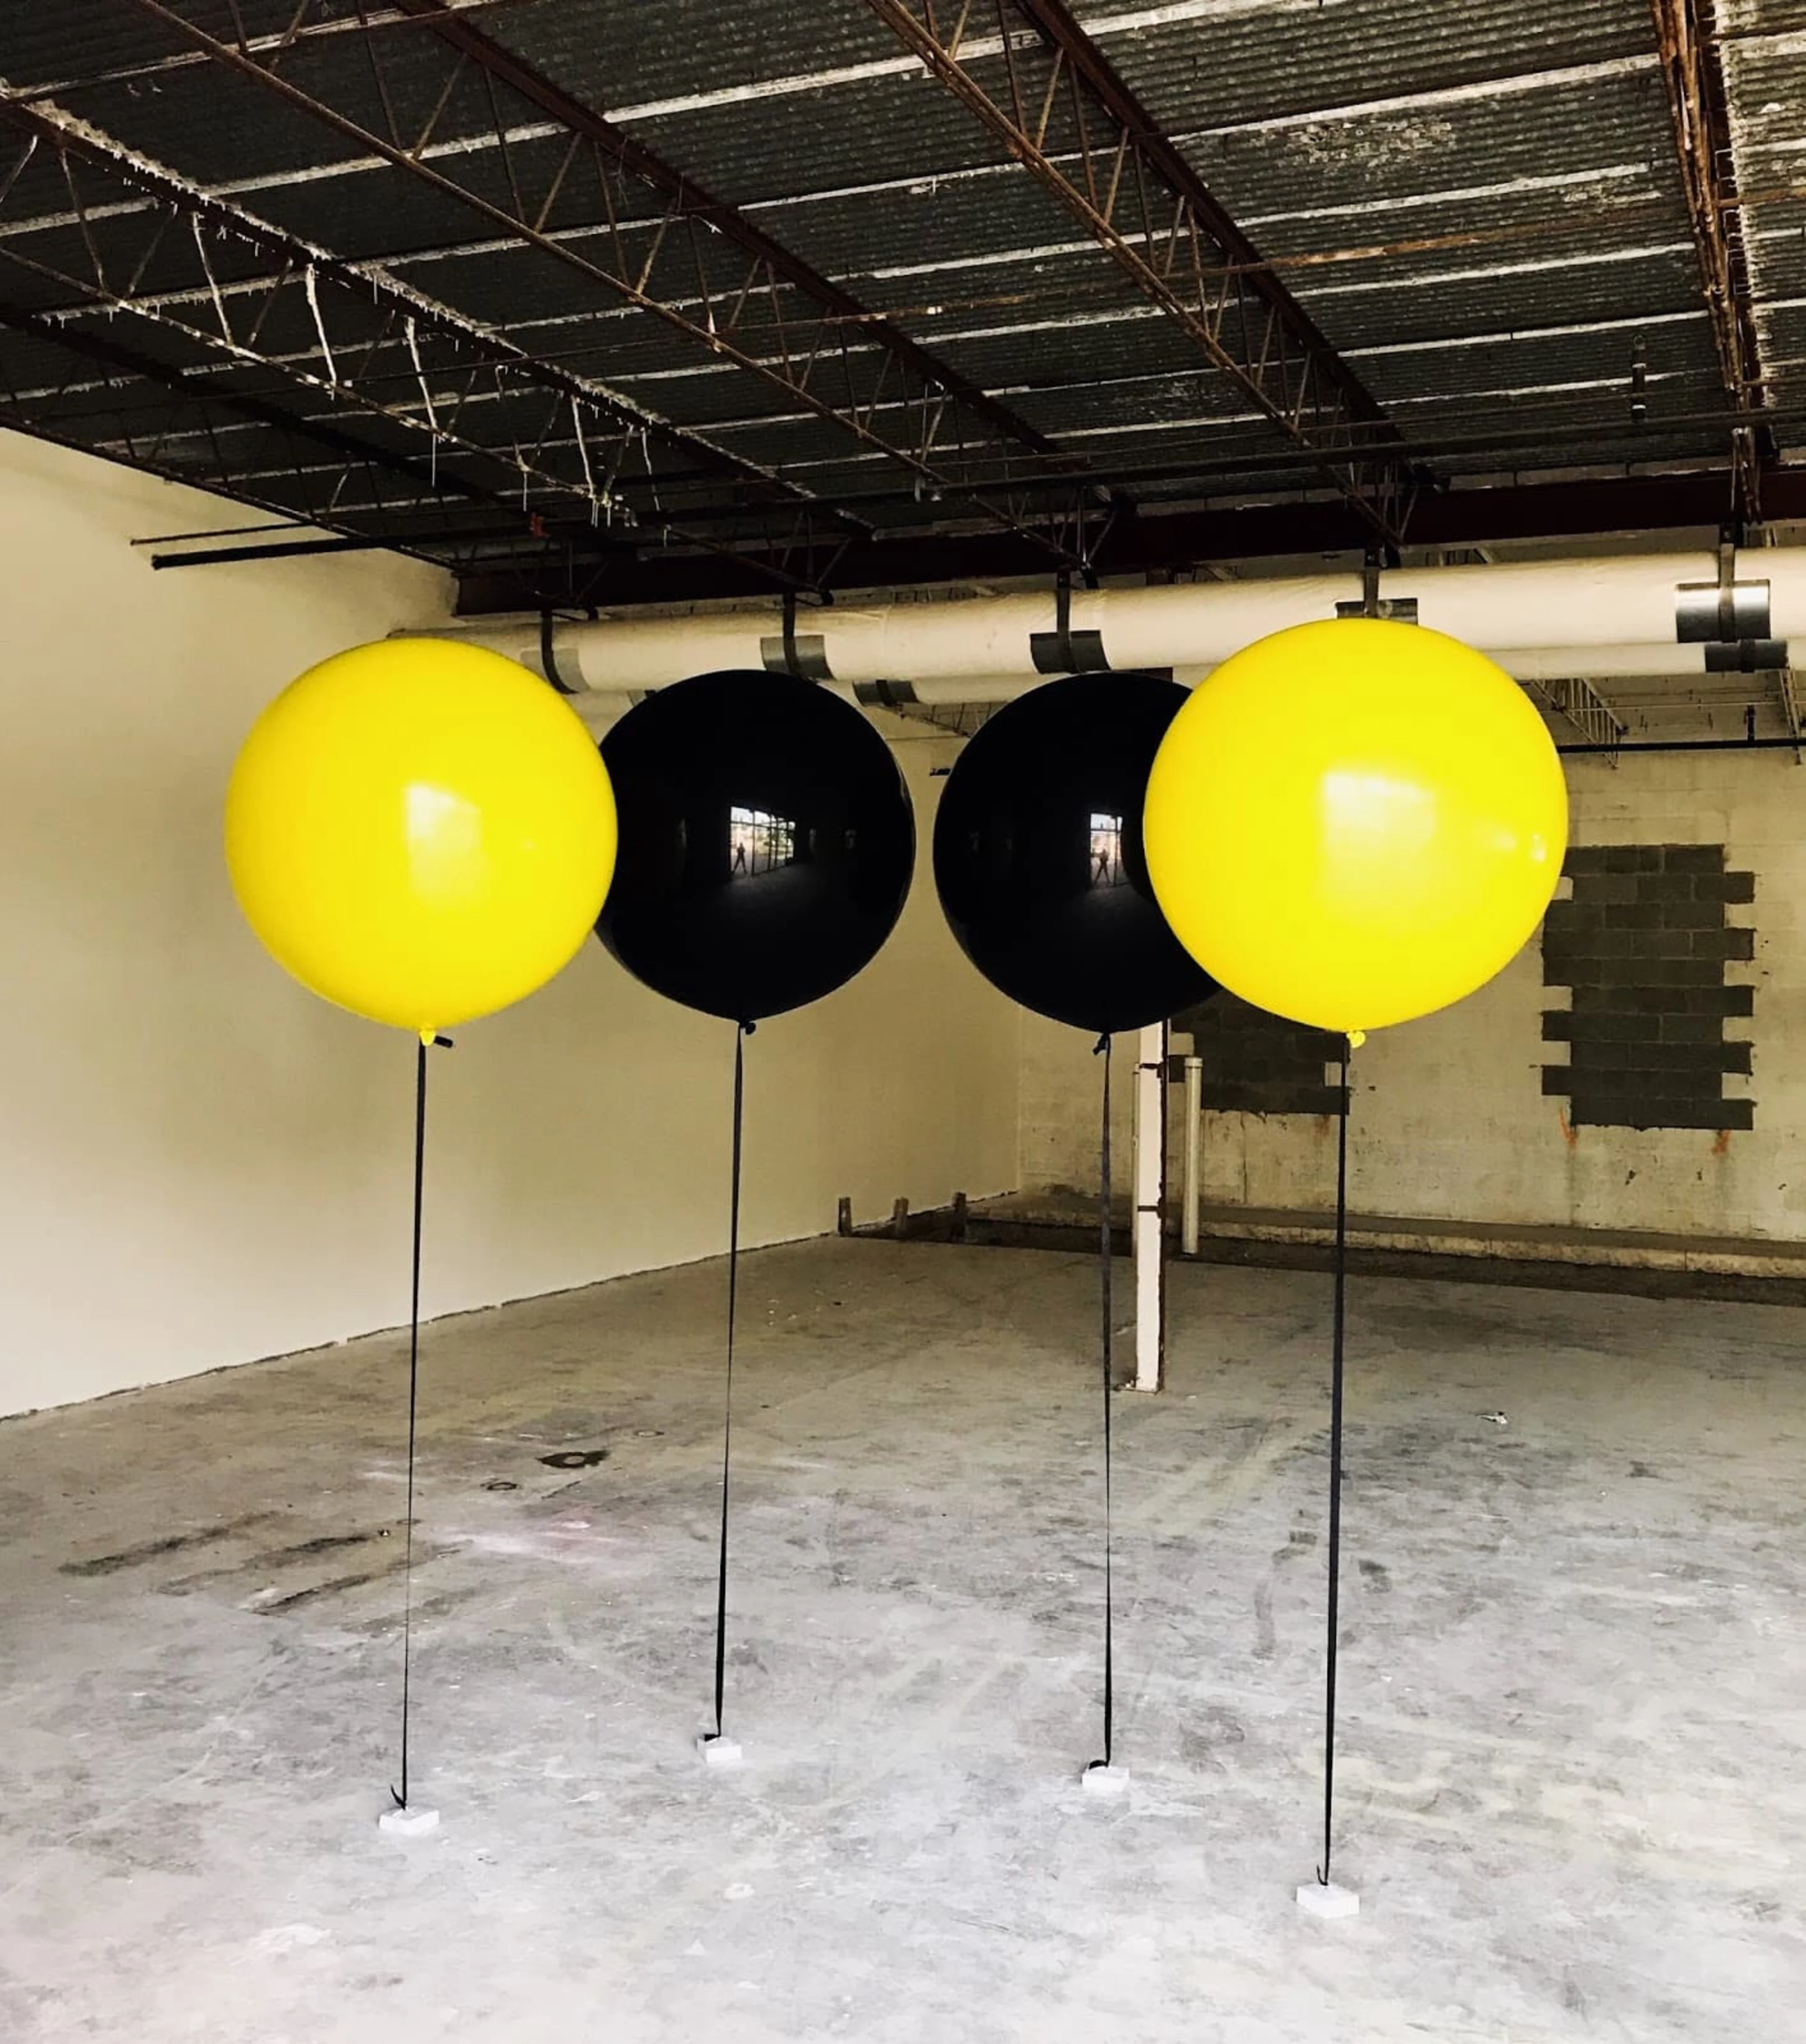 Black and yellow balloon in an empty concrete room.